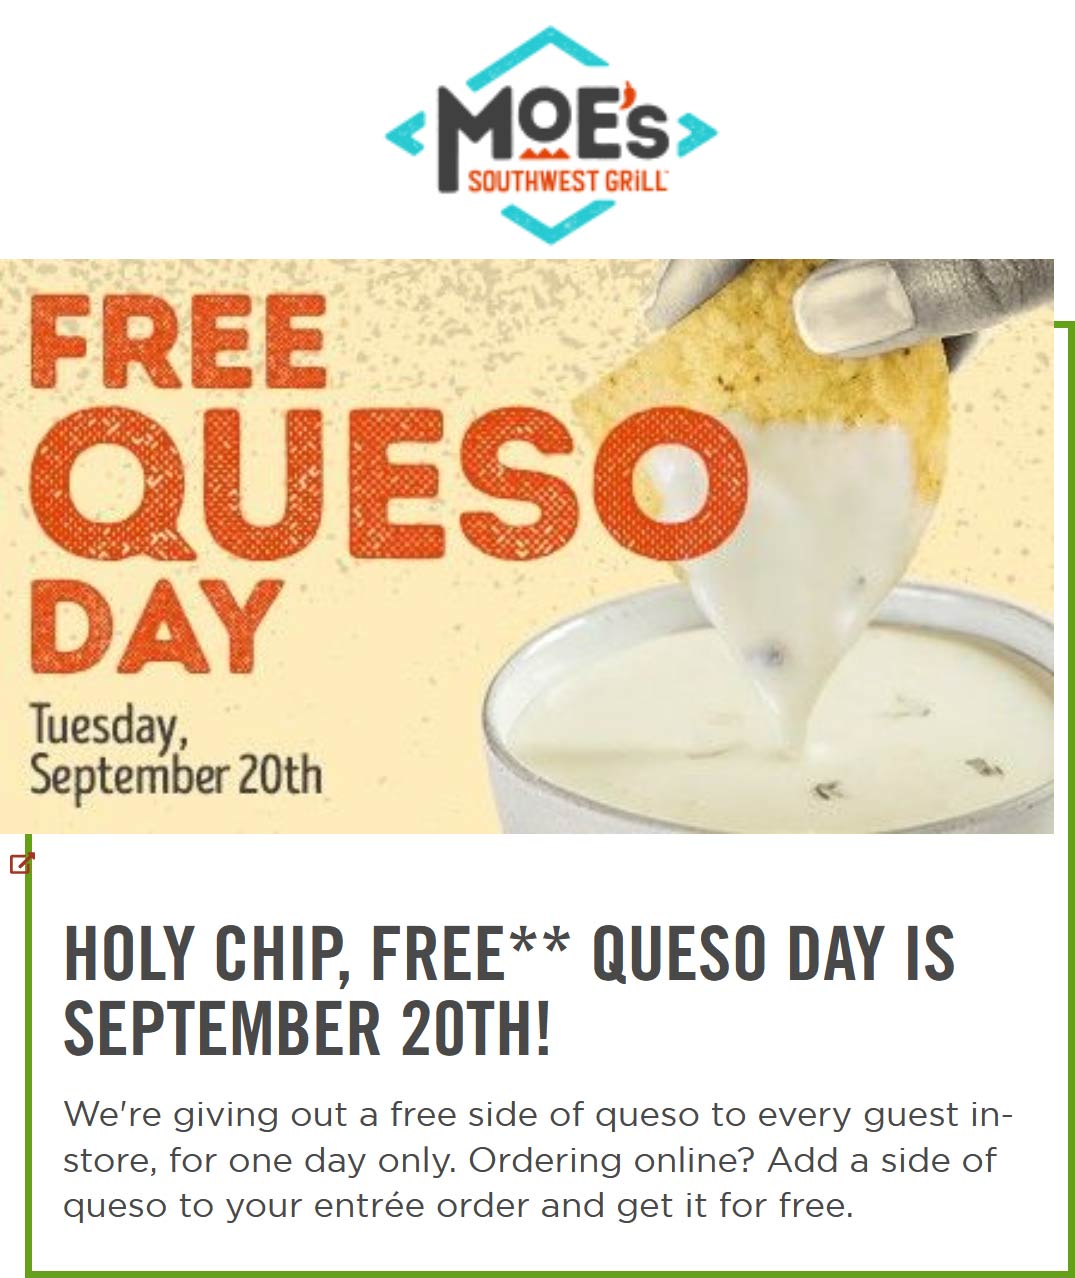 Moes Southwest Grill restaurants Coupon  Free queso Tuesday at Moes Southwest Grill restaurants #moessouthwestgrill 